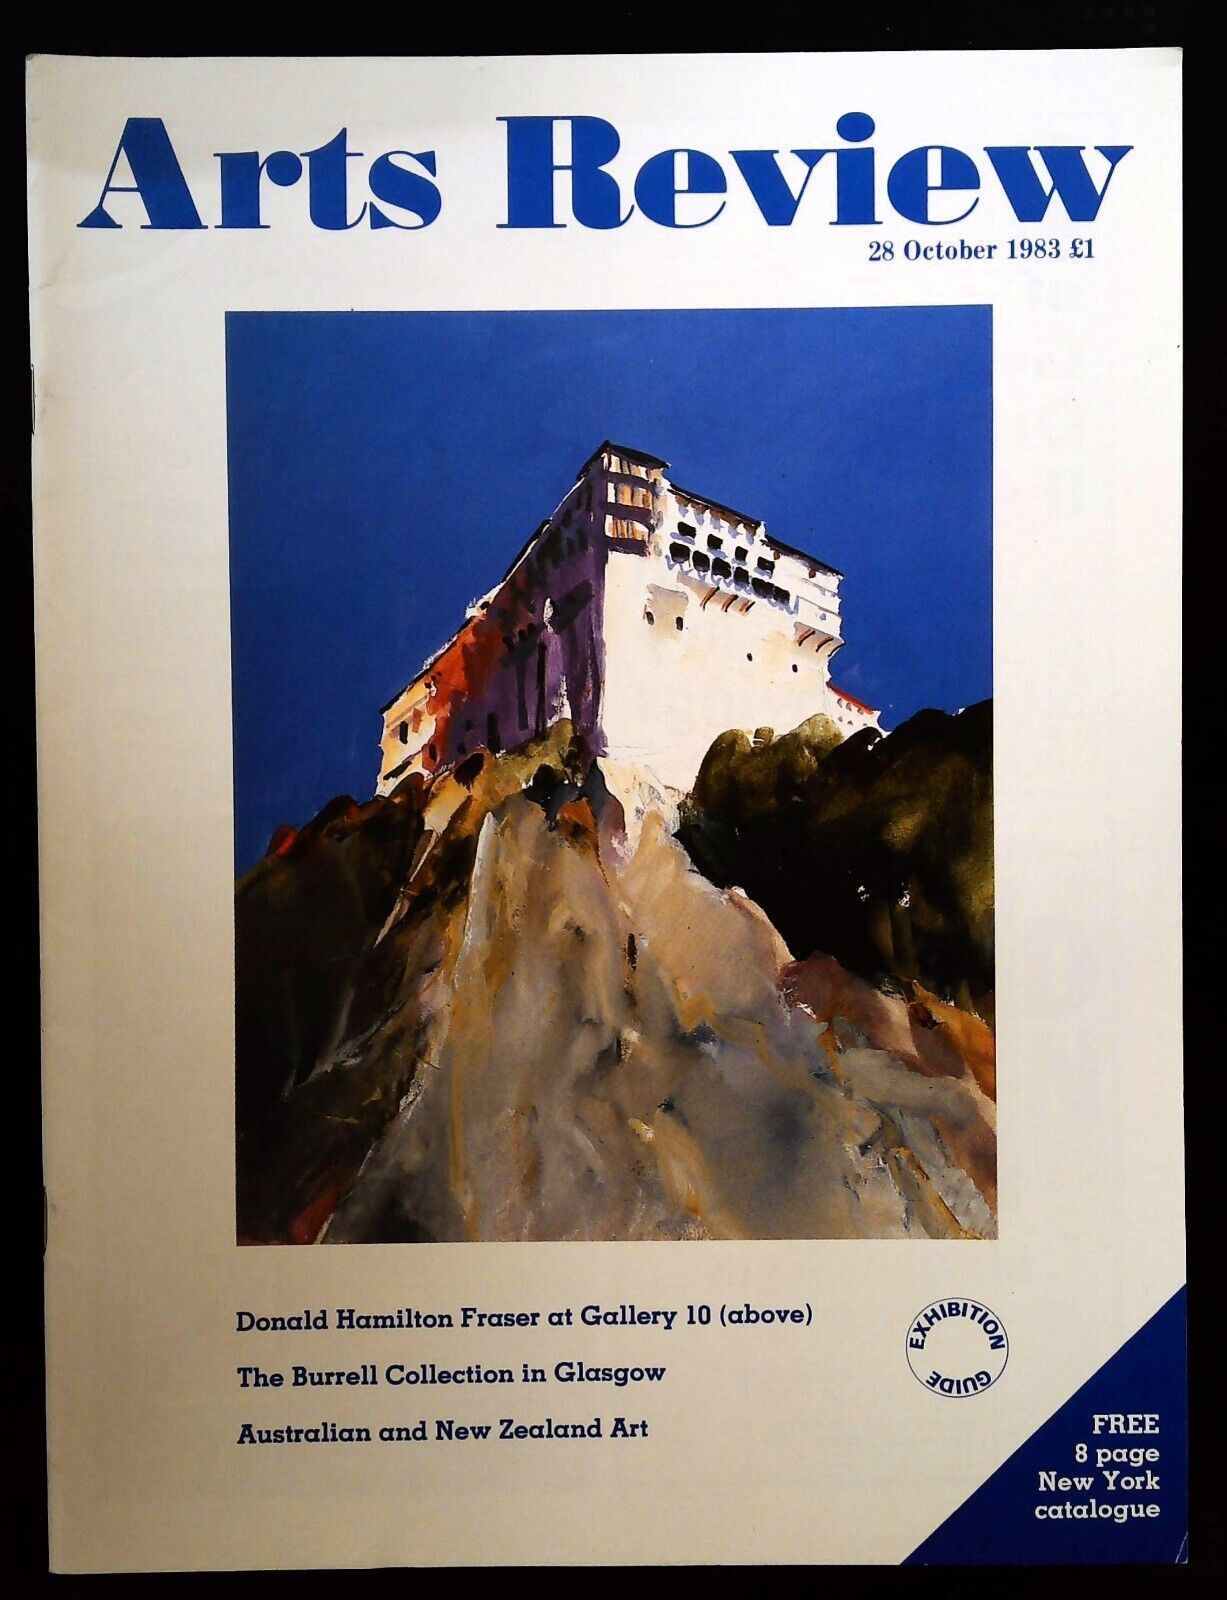 Primary image for Arts Review Magazine October 28 1983 mbox1441 Donald Hamilton